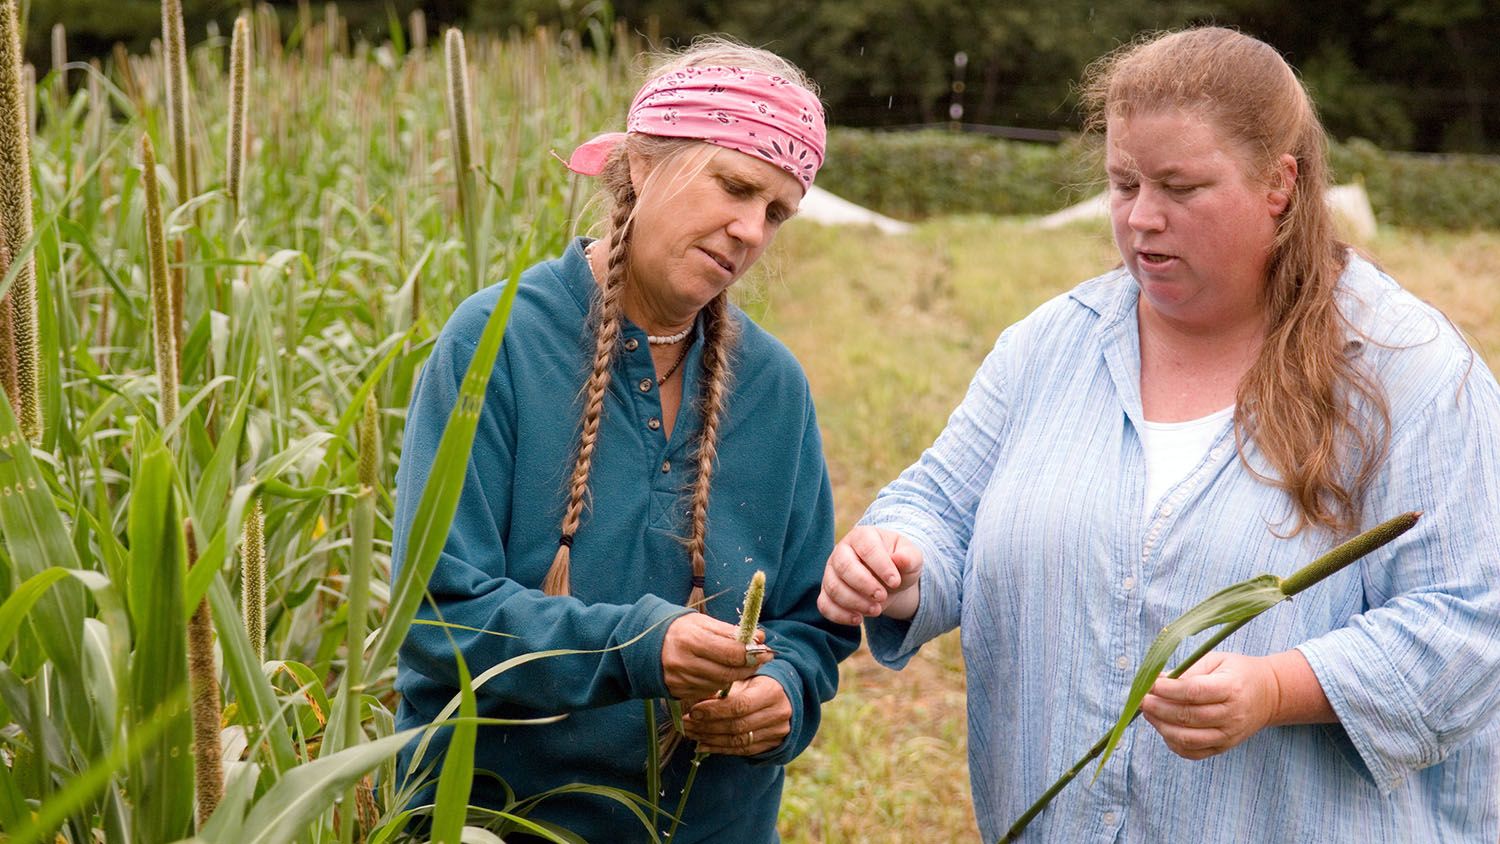 Two farmers consult over a sprig of wheat in a wheat field. One woman wears a pink bandana and has her hair in two long pigtails.